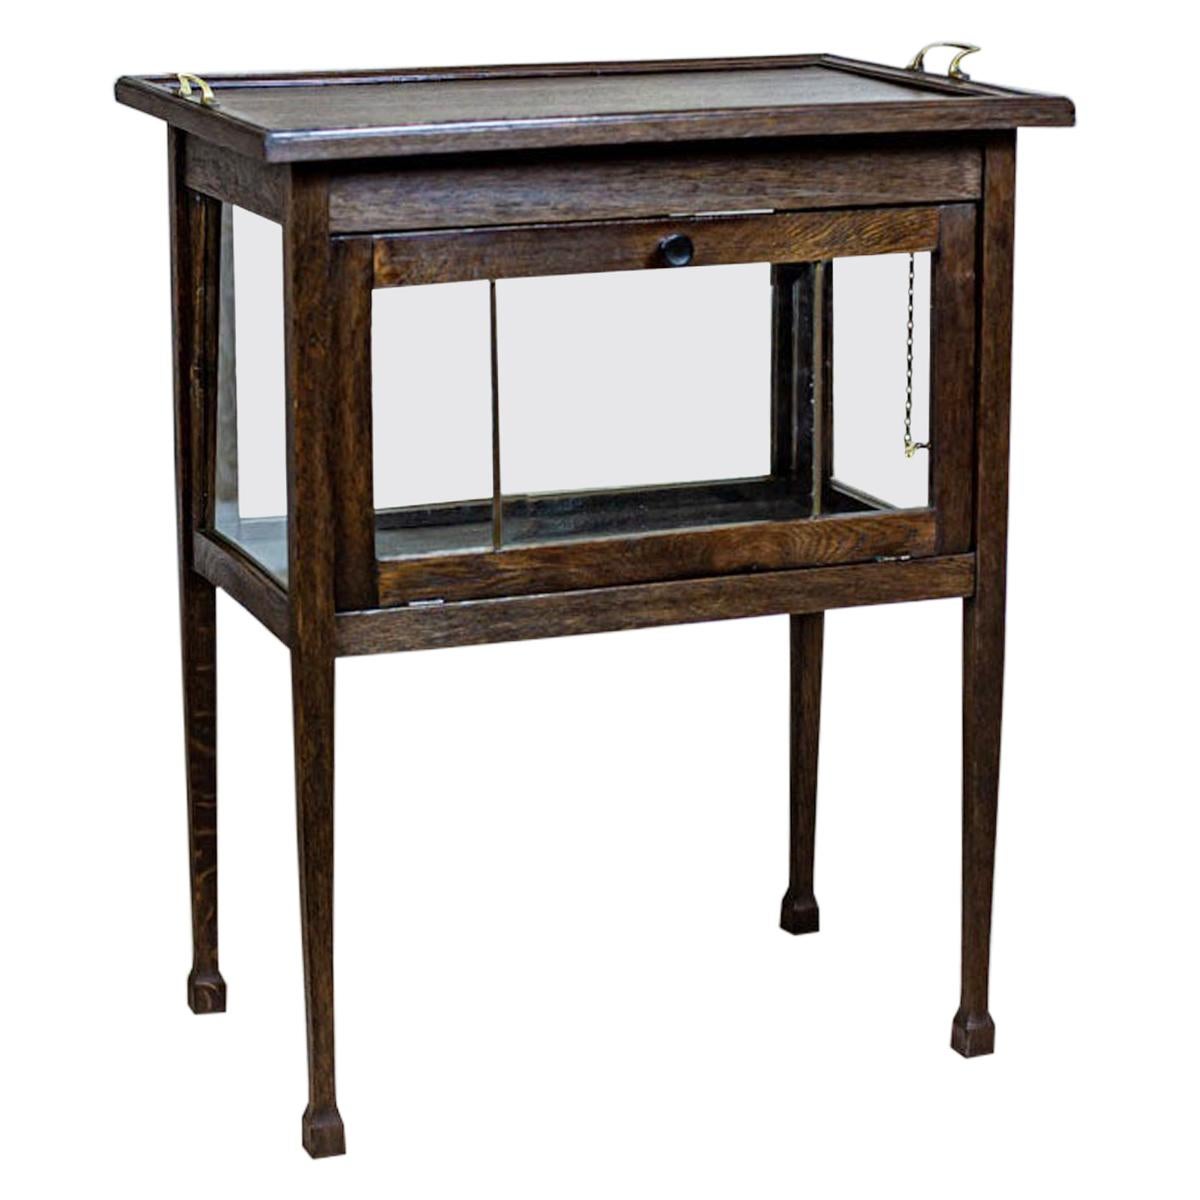 Oak Tea Cabinet from the Early 20th Century